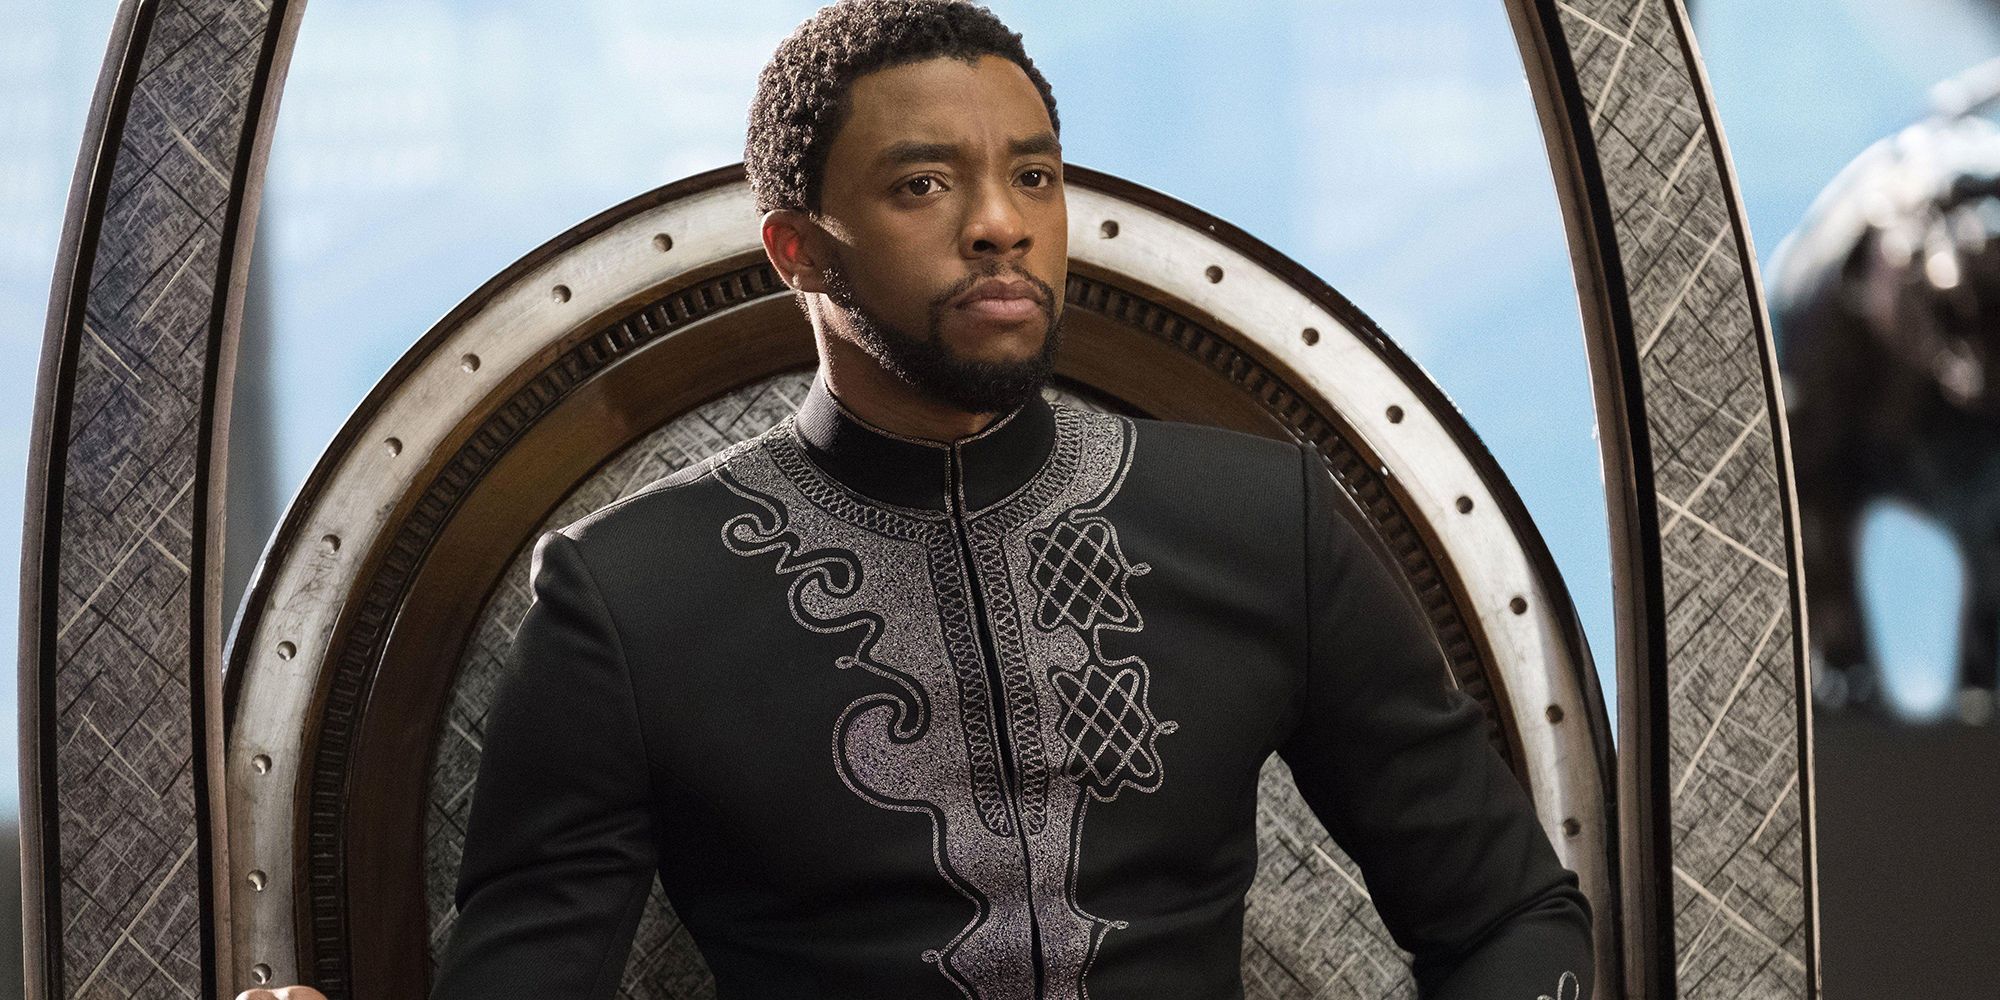 Black Panther's T'Challa sitting on his throne